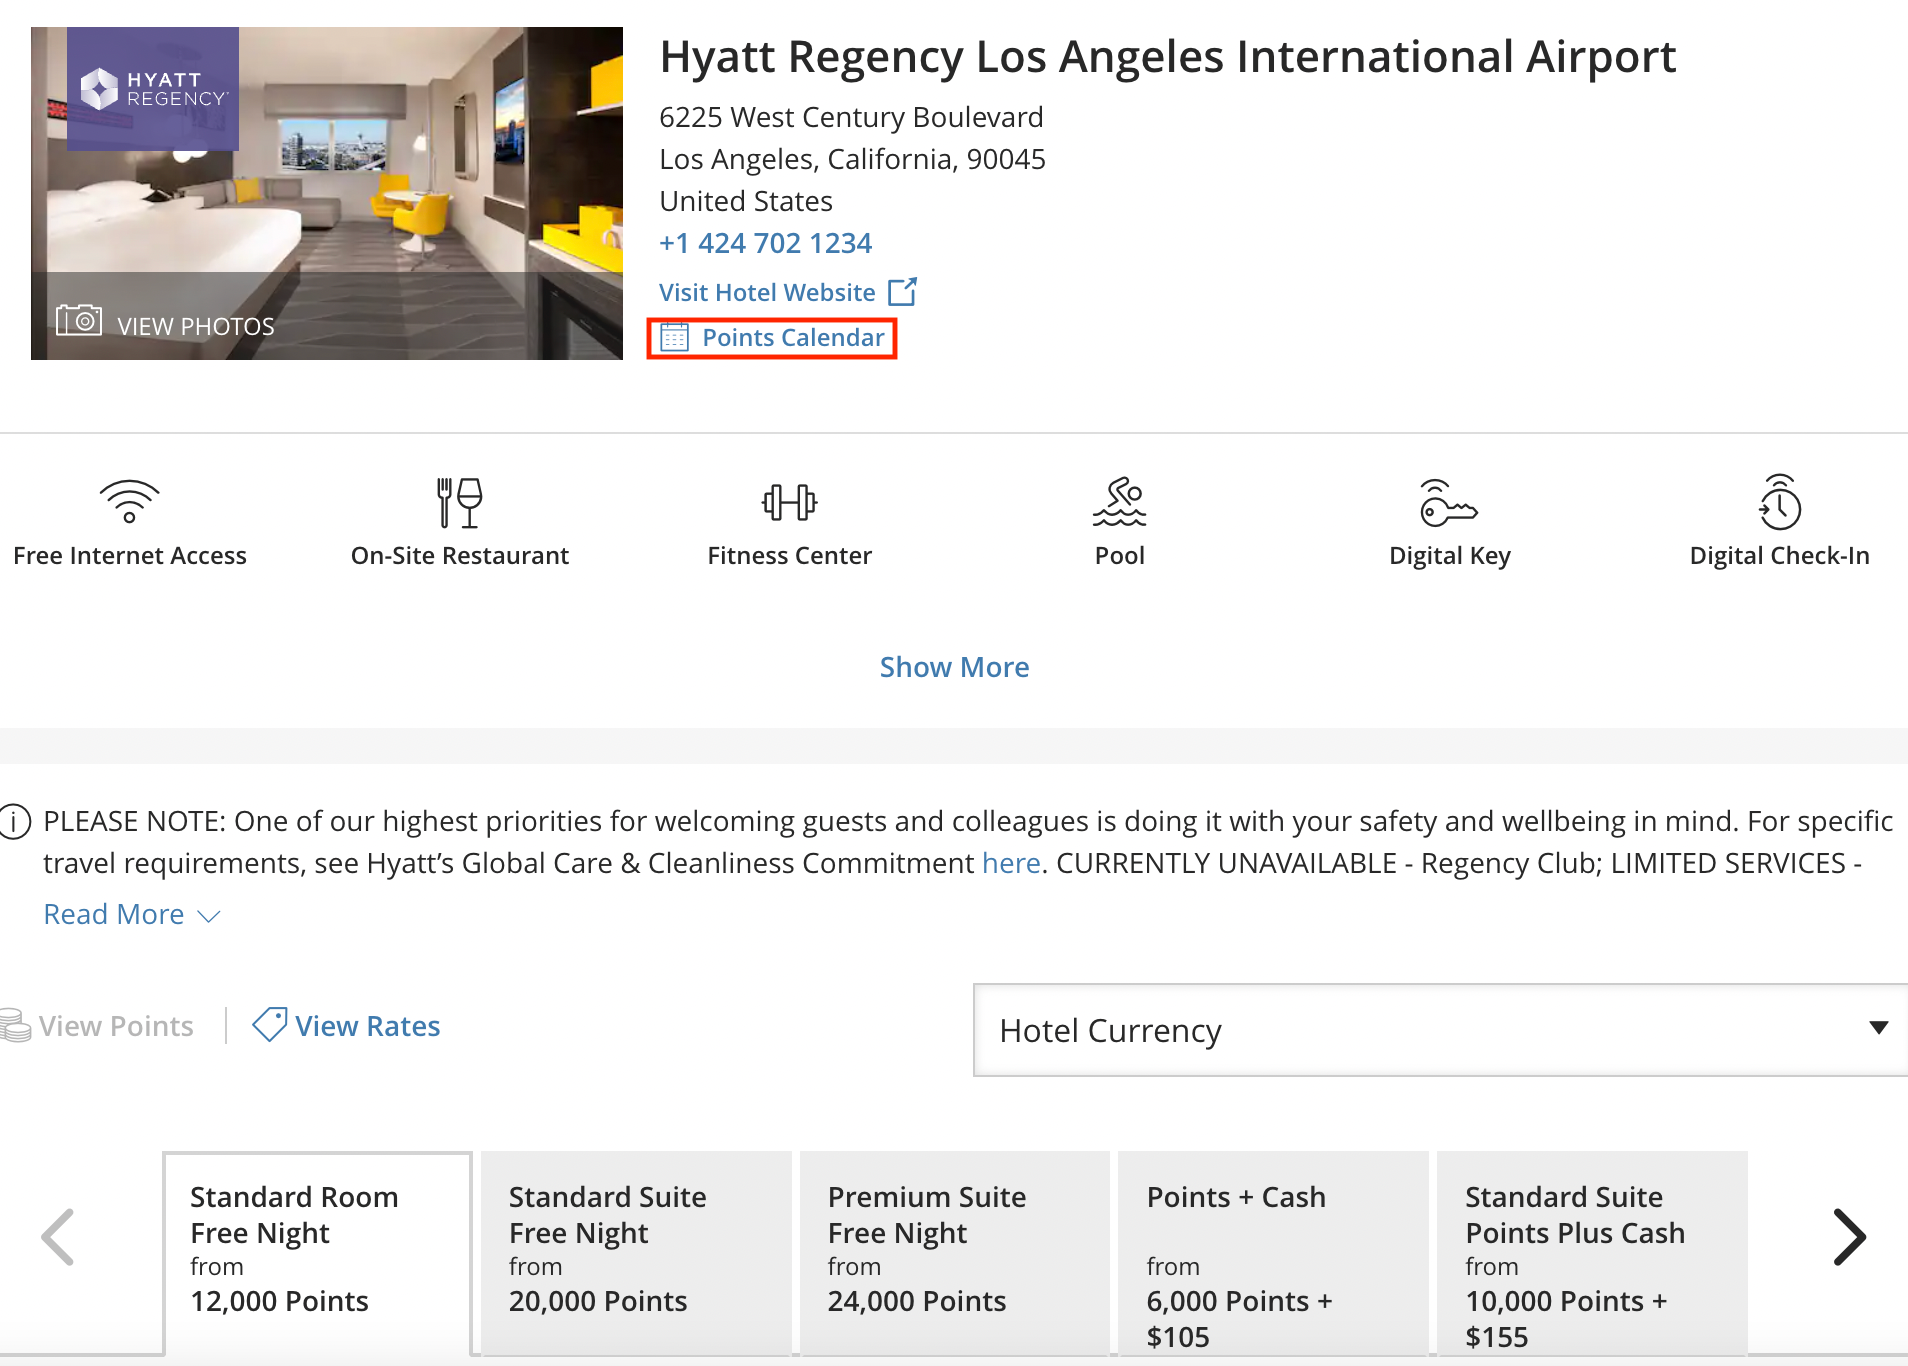 Searching for a Hyatt stay on points and cash at the Hyatt Regency LAX